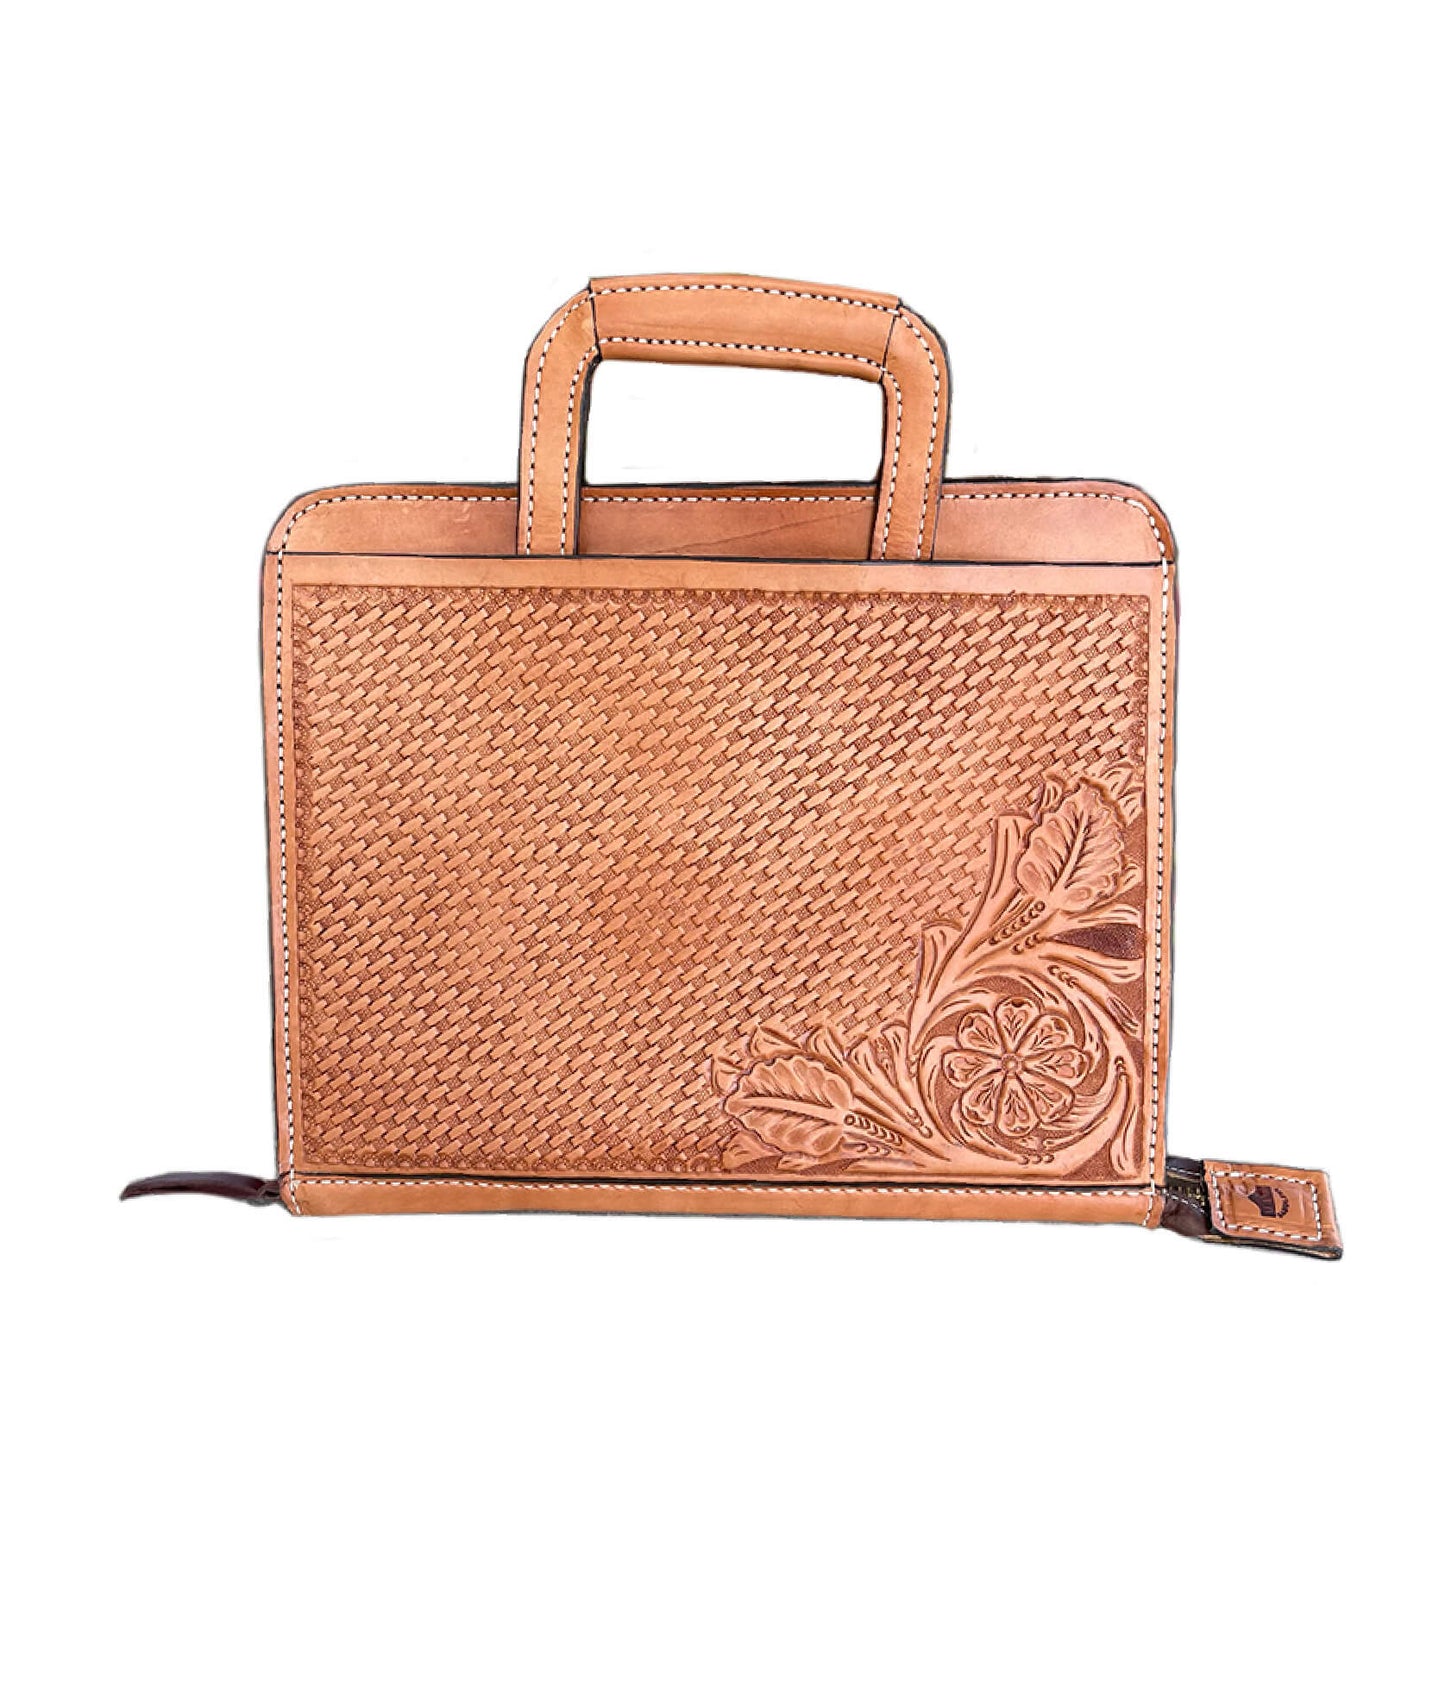 Cowboy Briefcase golden leather basket and daisy tooling